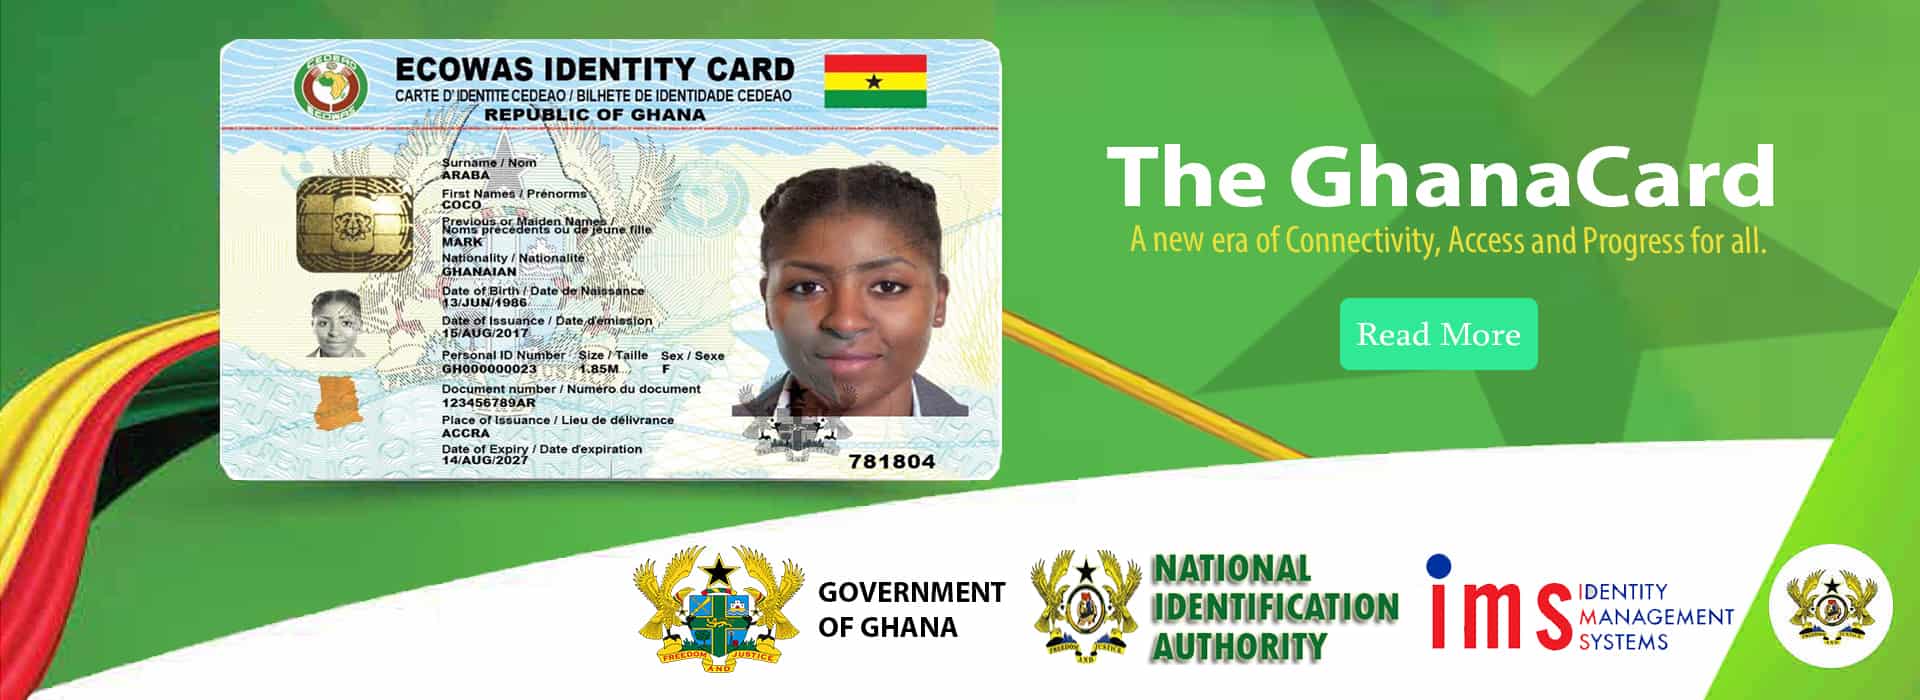 NIA - Ghana Card Various District Registration Centers & Offices in Ghana